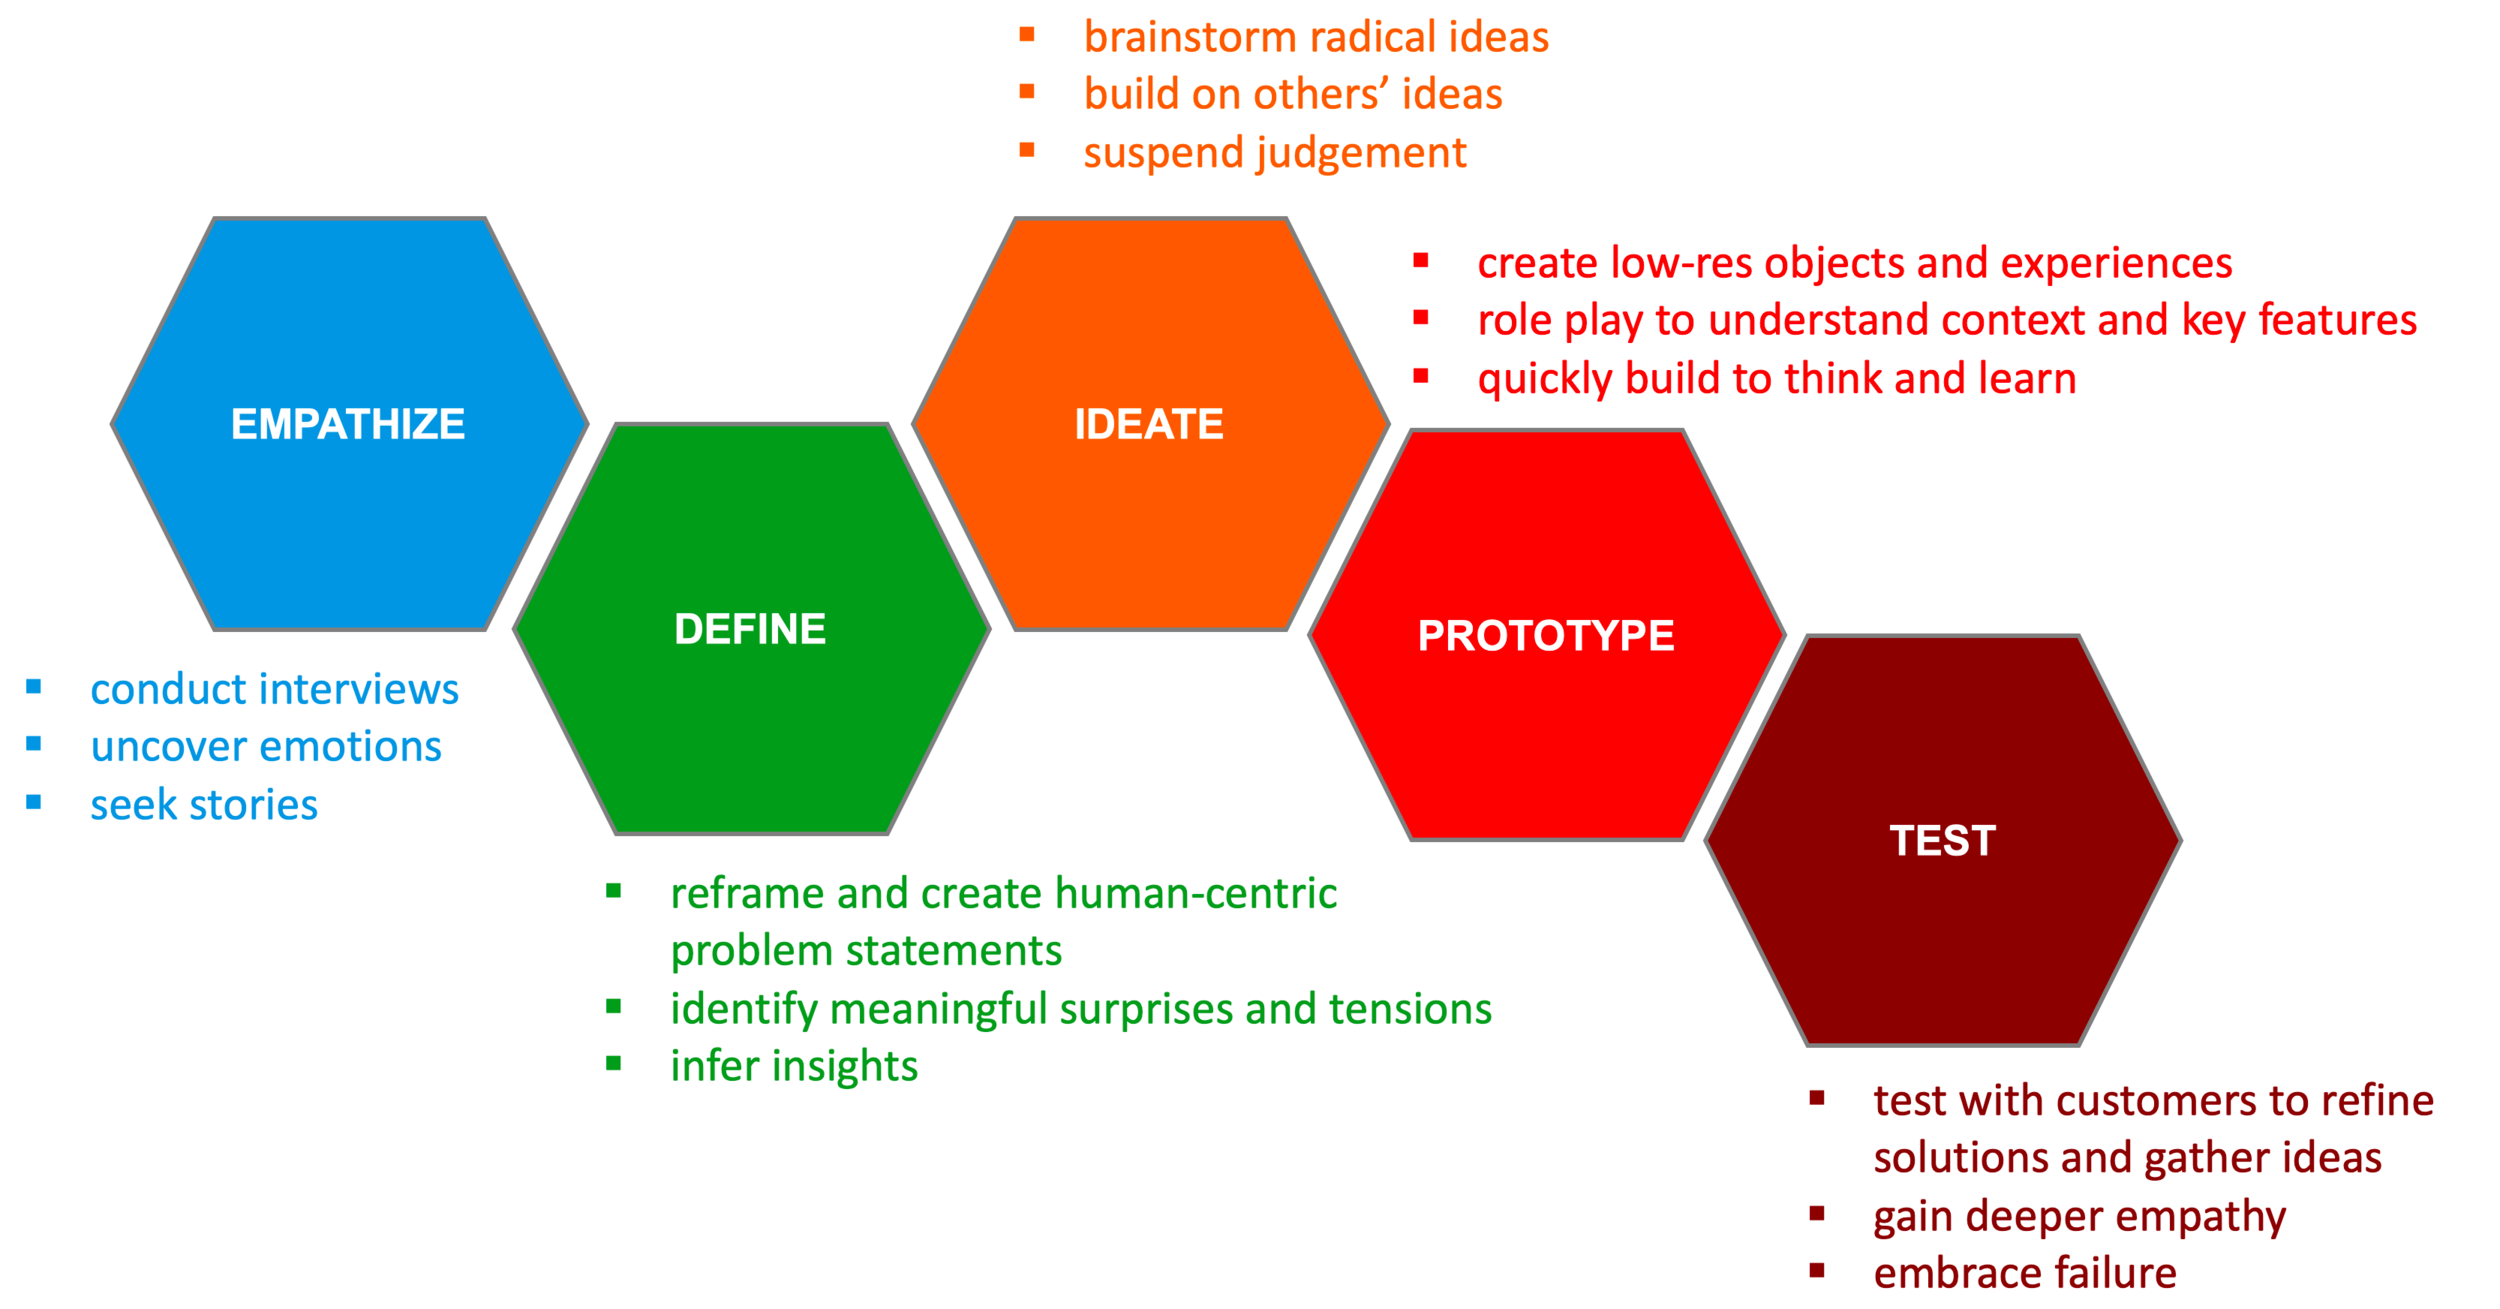 Figure 1: The classic design thinking process graphic, adapted from Stanford’s d.school Executive Education [7]. There is no significance to the shape or the color. Iteration and critique are implied throughout.